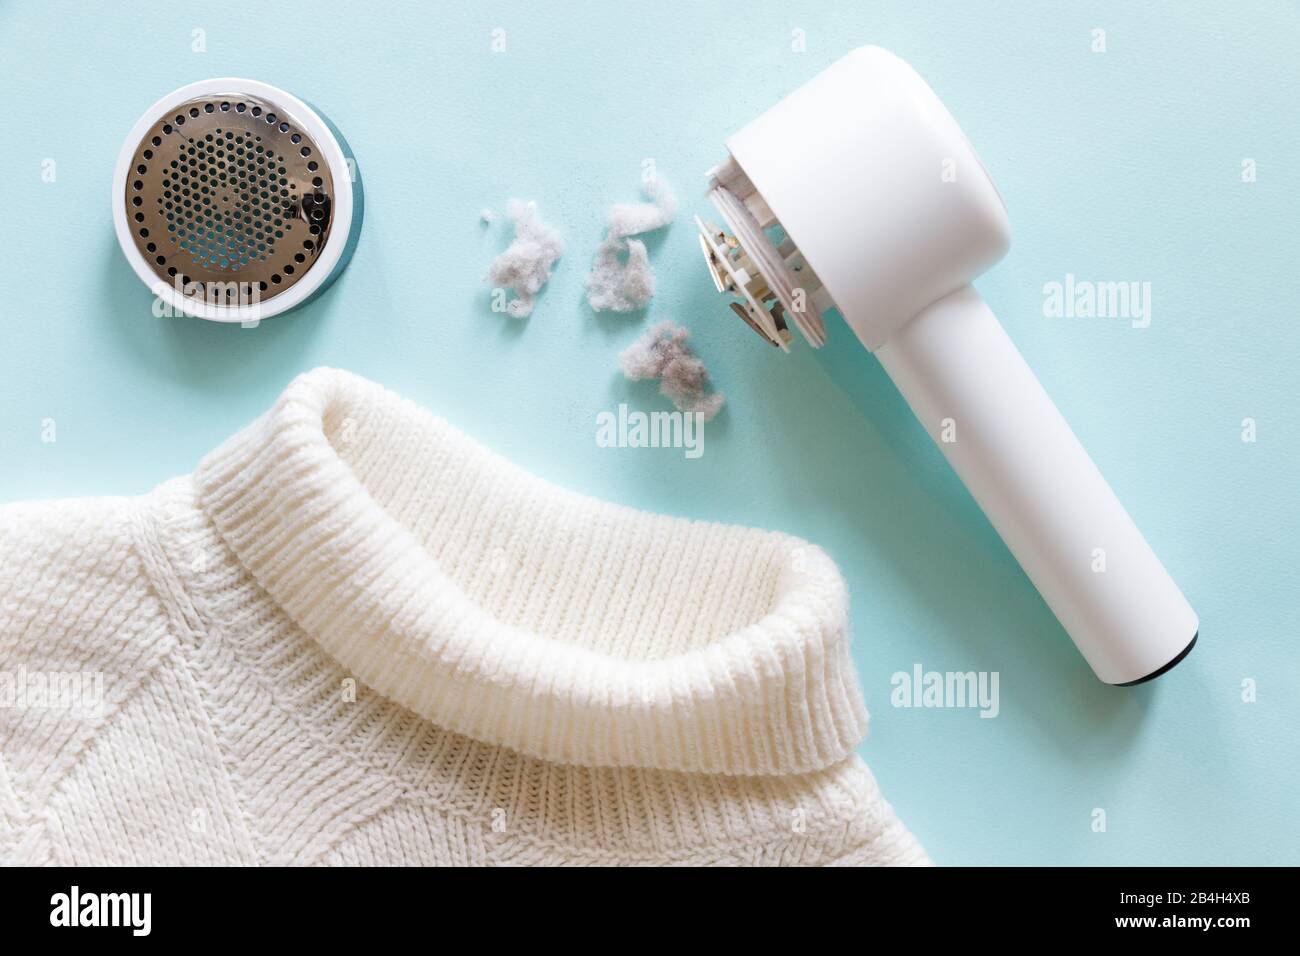 Pilling/ Removing lint from a white acrylic or wool sweater. Electric device after cleaning and collected fluff/lint on light blue background. Top vie Stock Photo